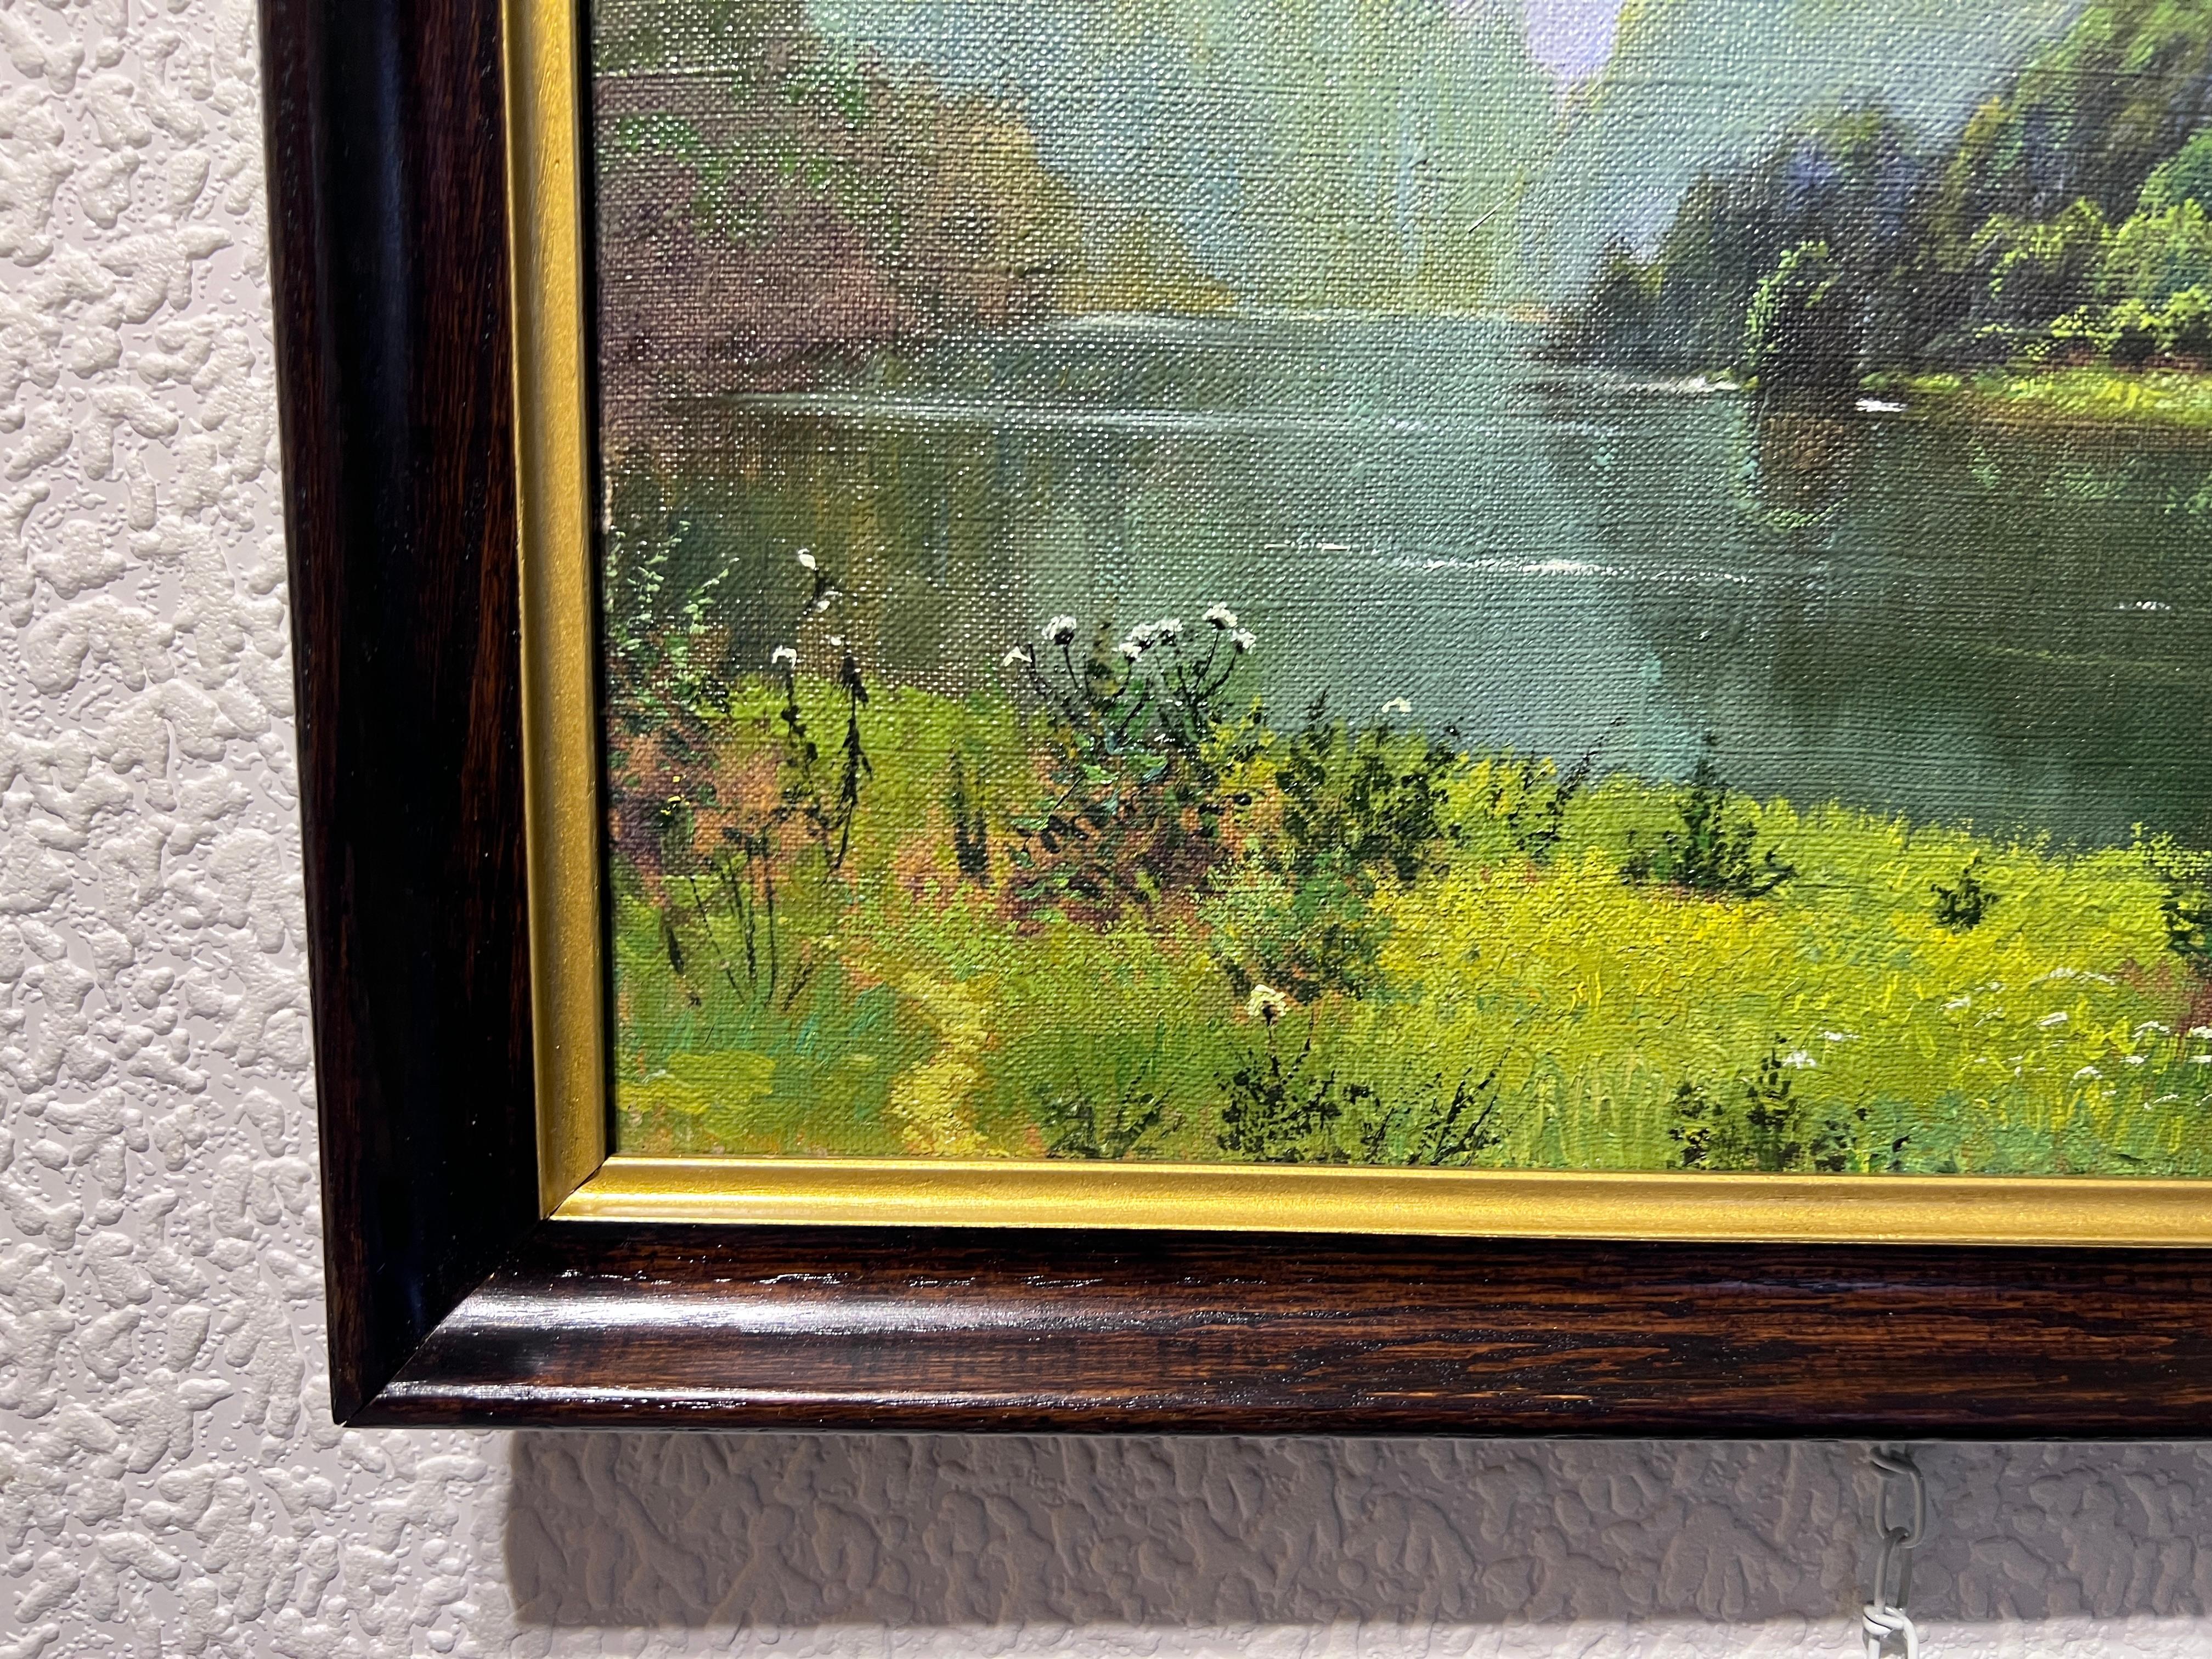 This original vintage oil painting on board depicting a tranquil Russian landscape, characterized by a gentle river that meanders through a densely wooded area. 

The lush greenery of the trees reflects vividly in the calm, clear waters, adding a